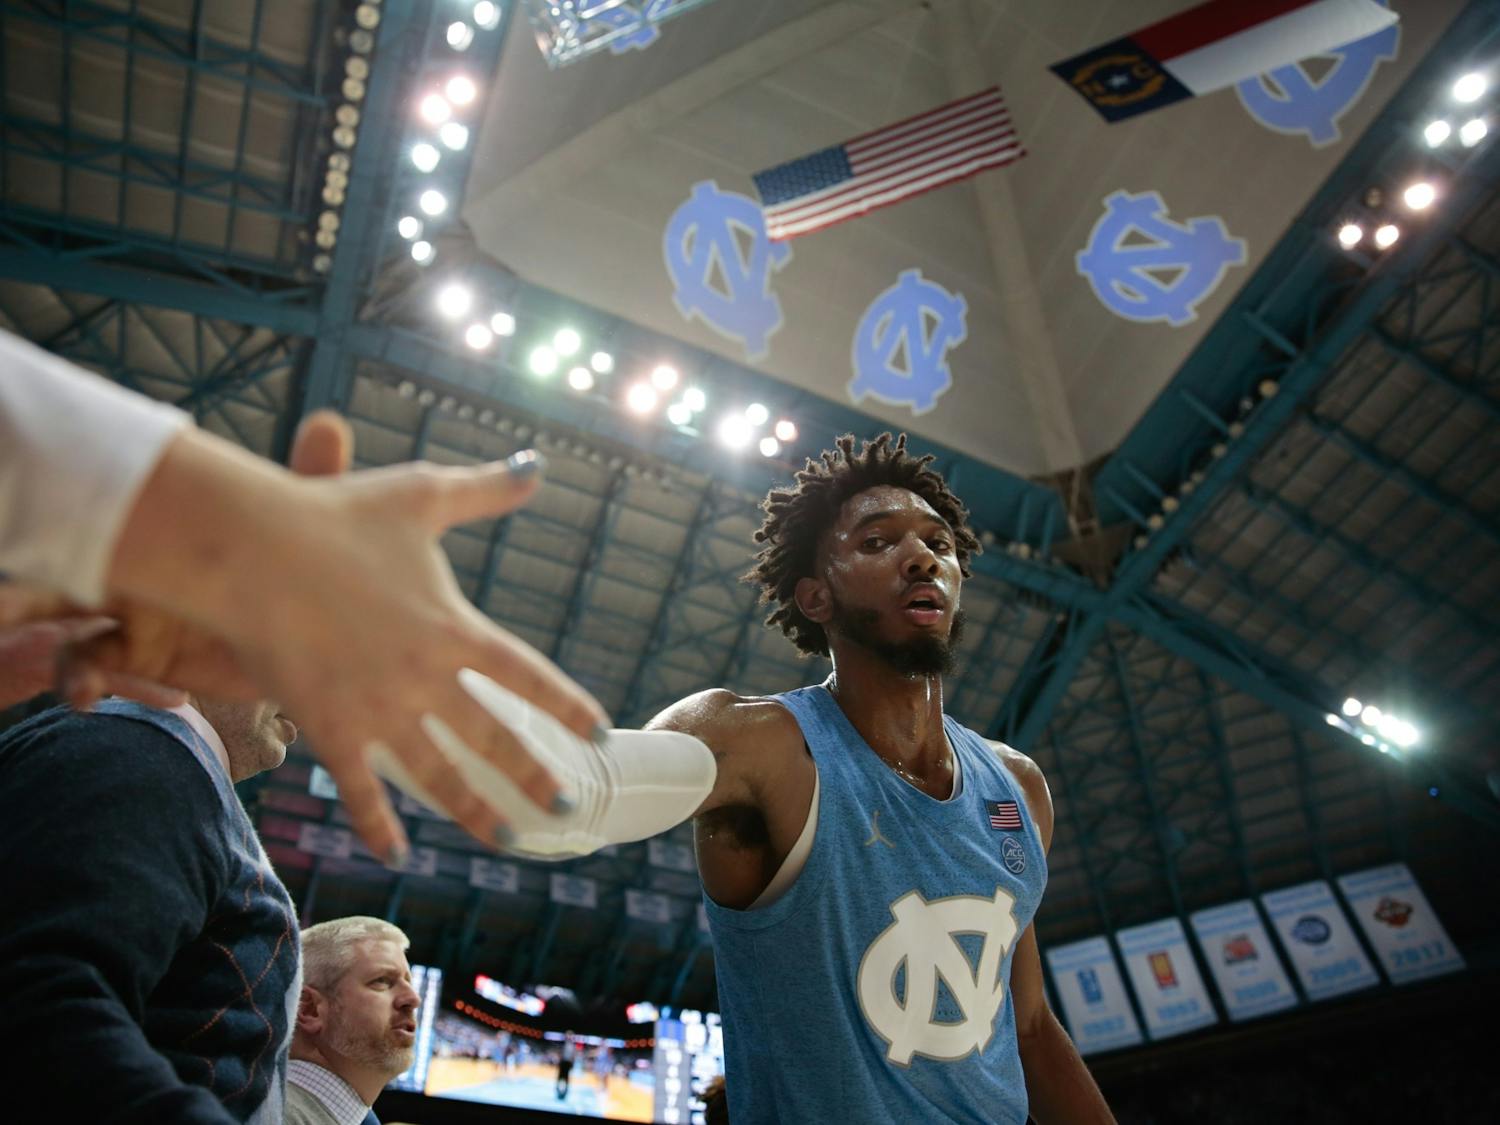 UNC sophomore guard Leaky Black high-fives down the bench during a game against Duke in the Smith Center on Saturday, Feb. 8, 2020. The Tar Heels lost to the Blue Devils 98-96.